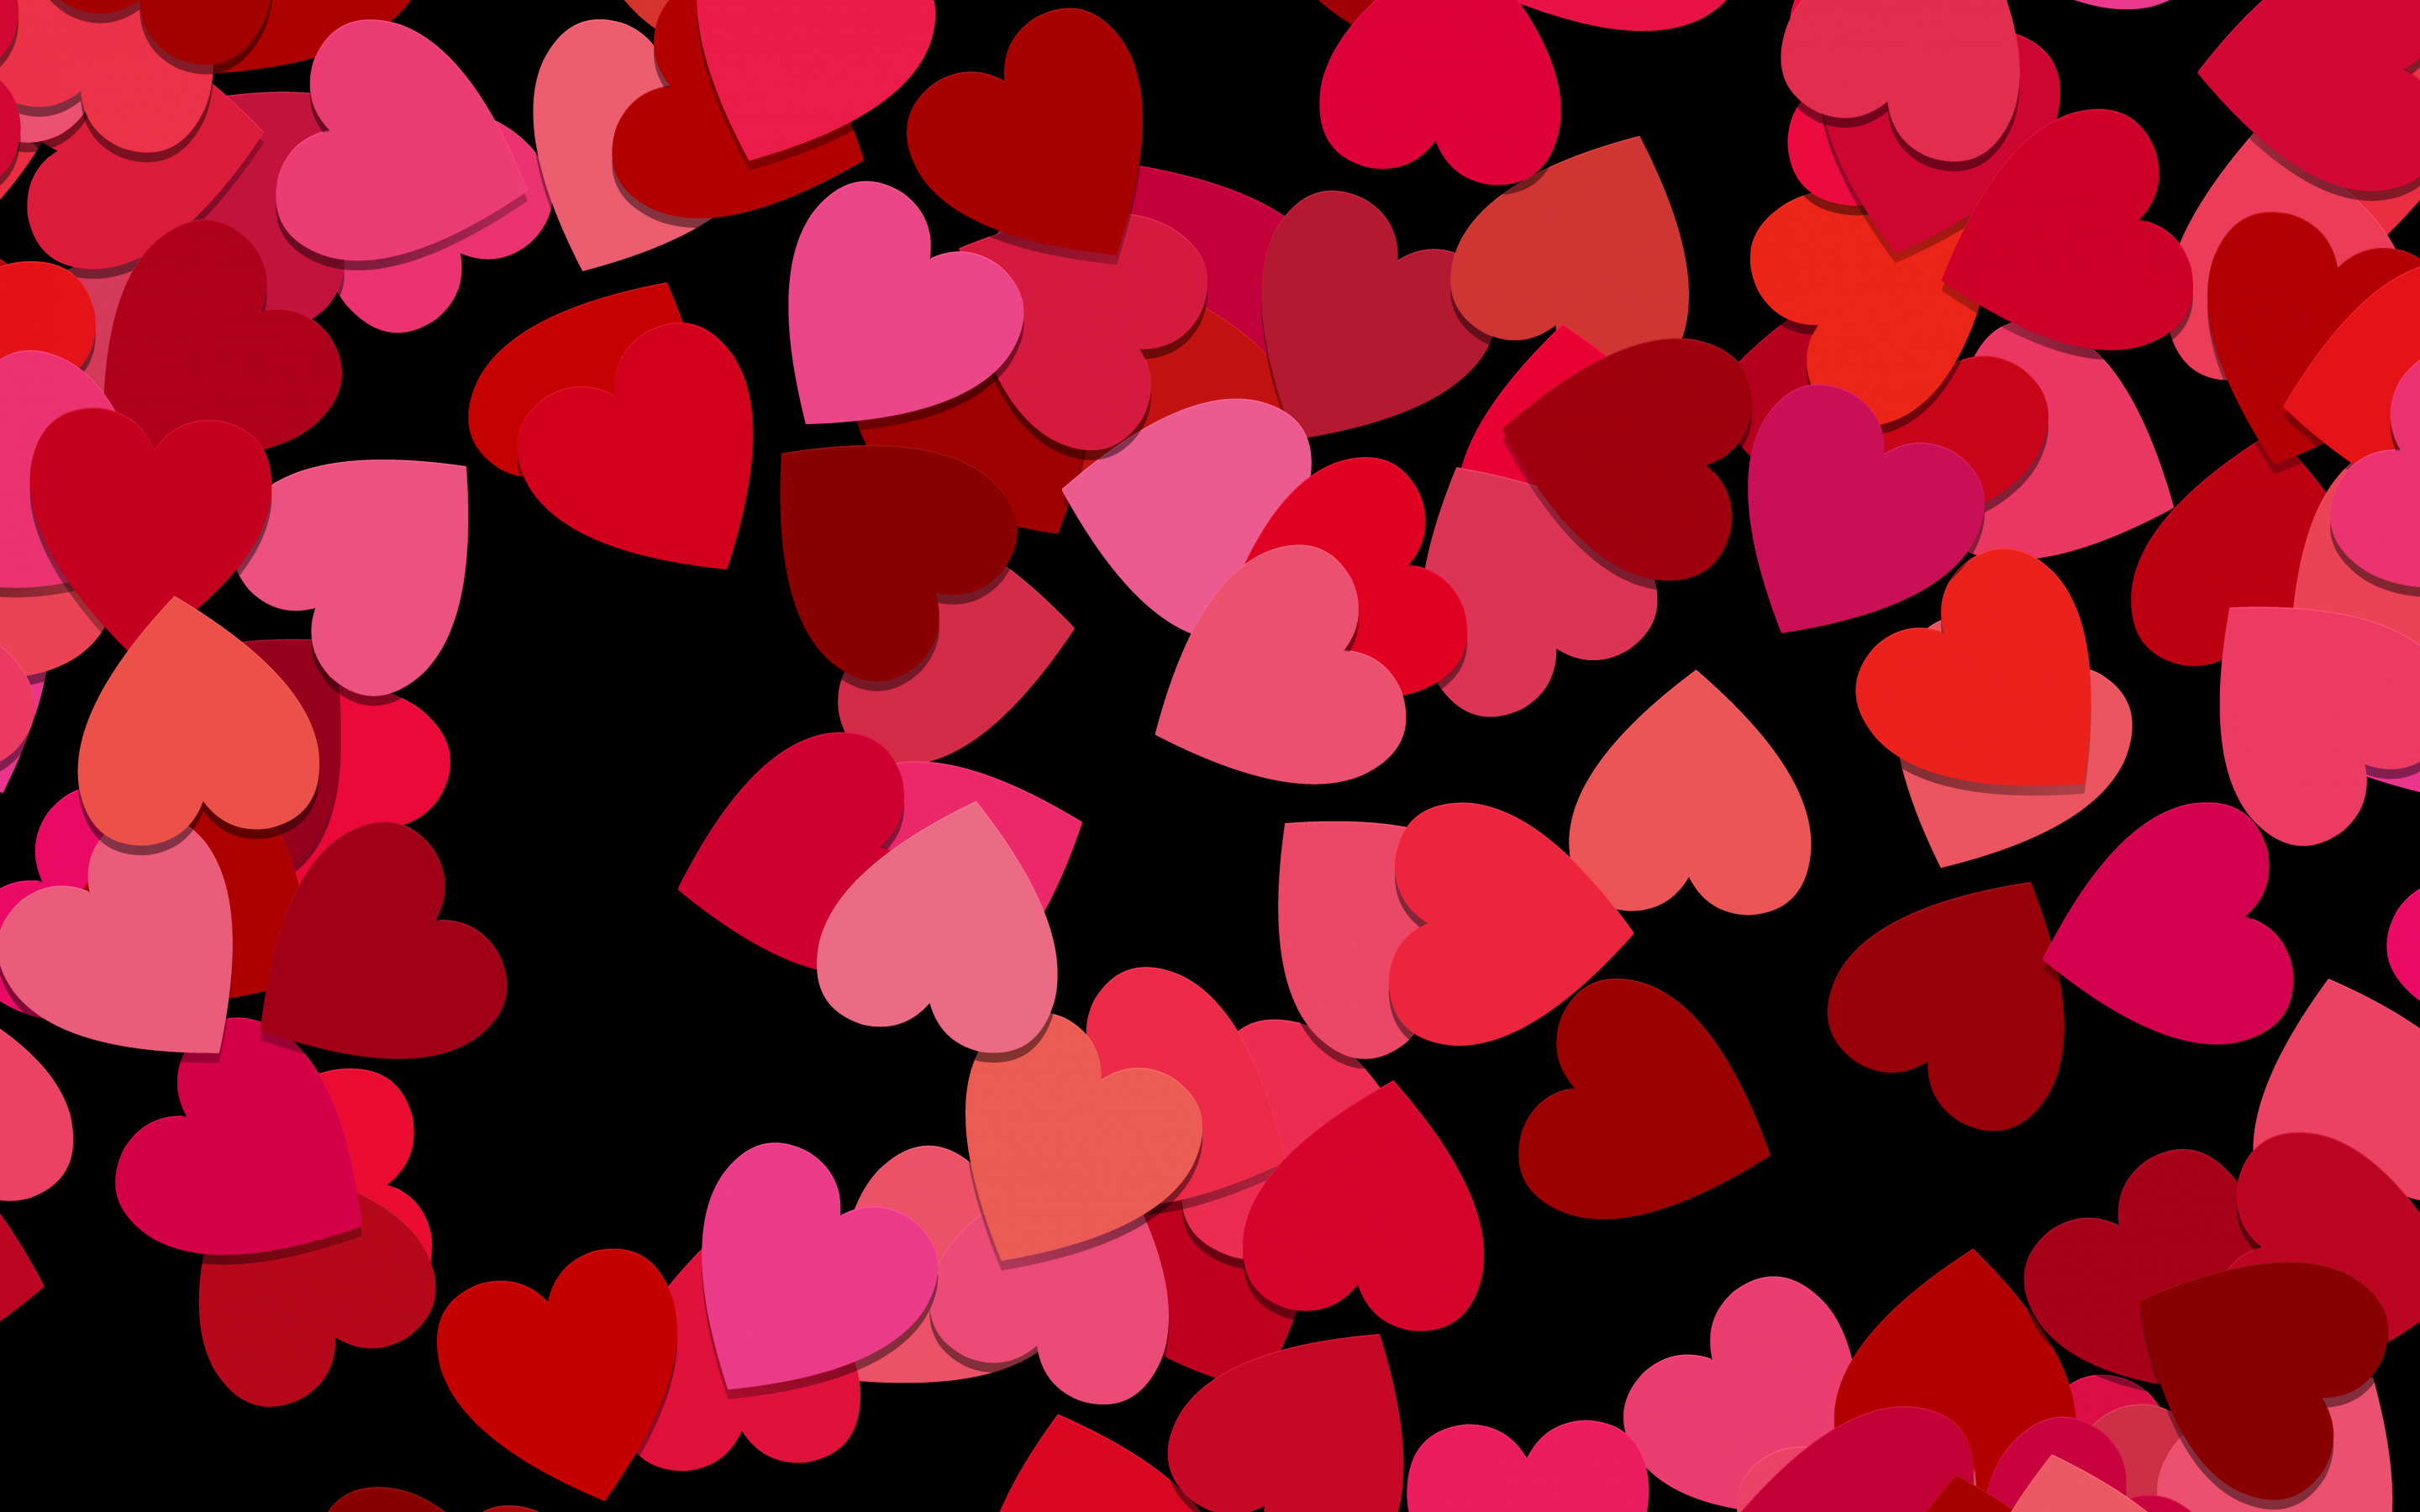 Love hearts 4K Wallpaper, Red hearts, Girly background, 5K, Love